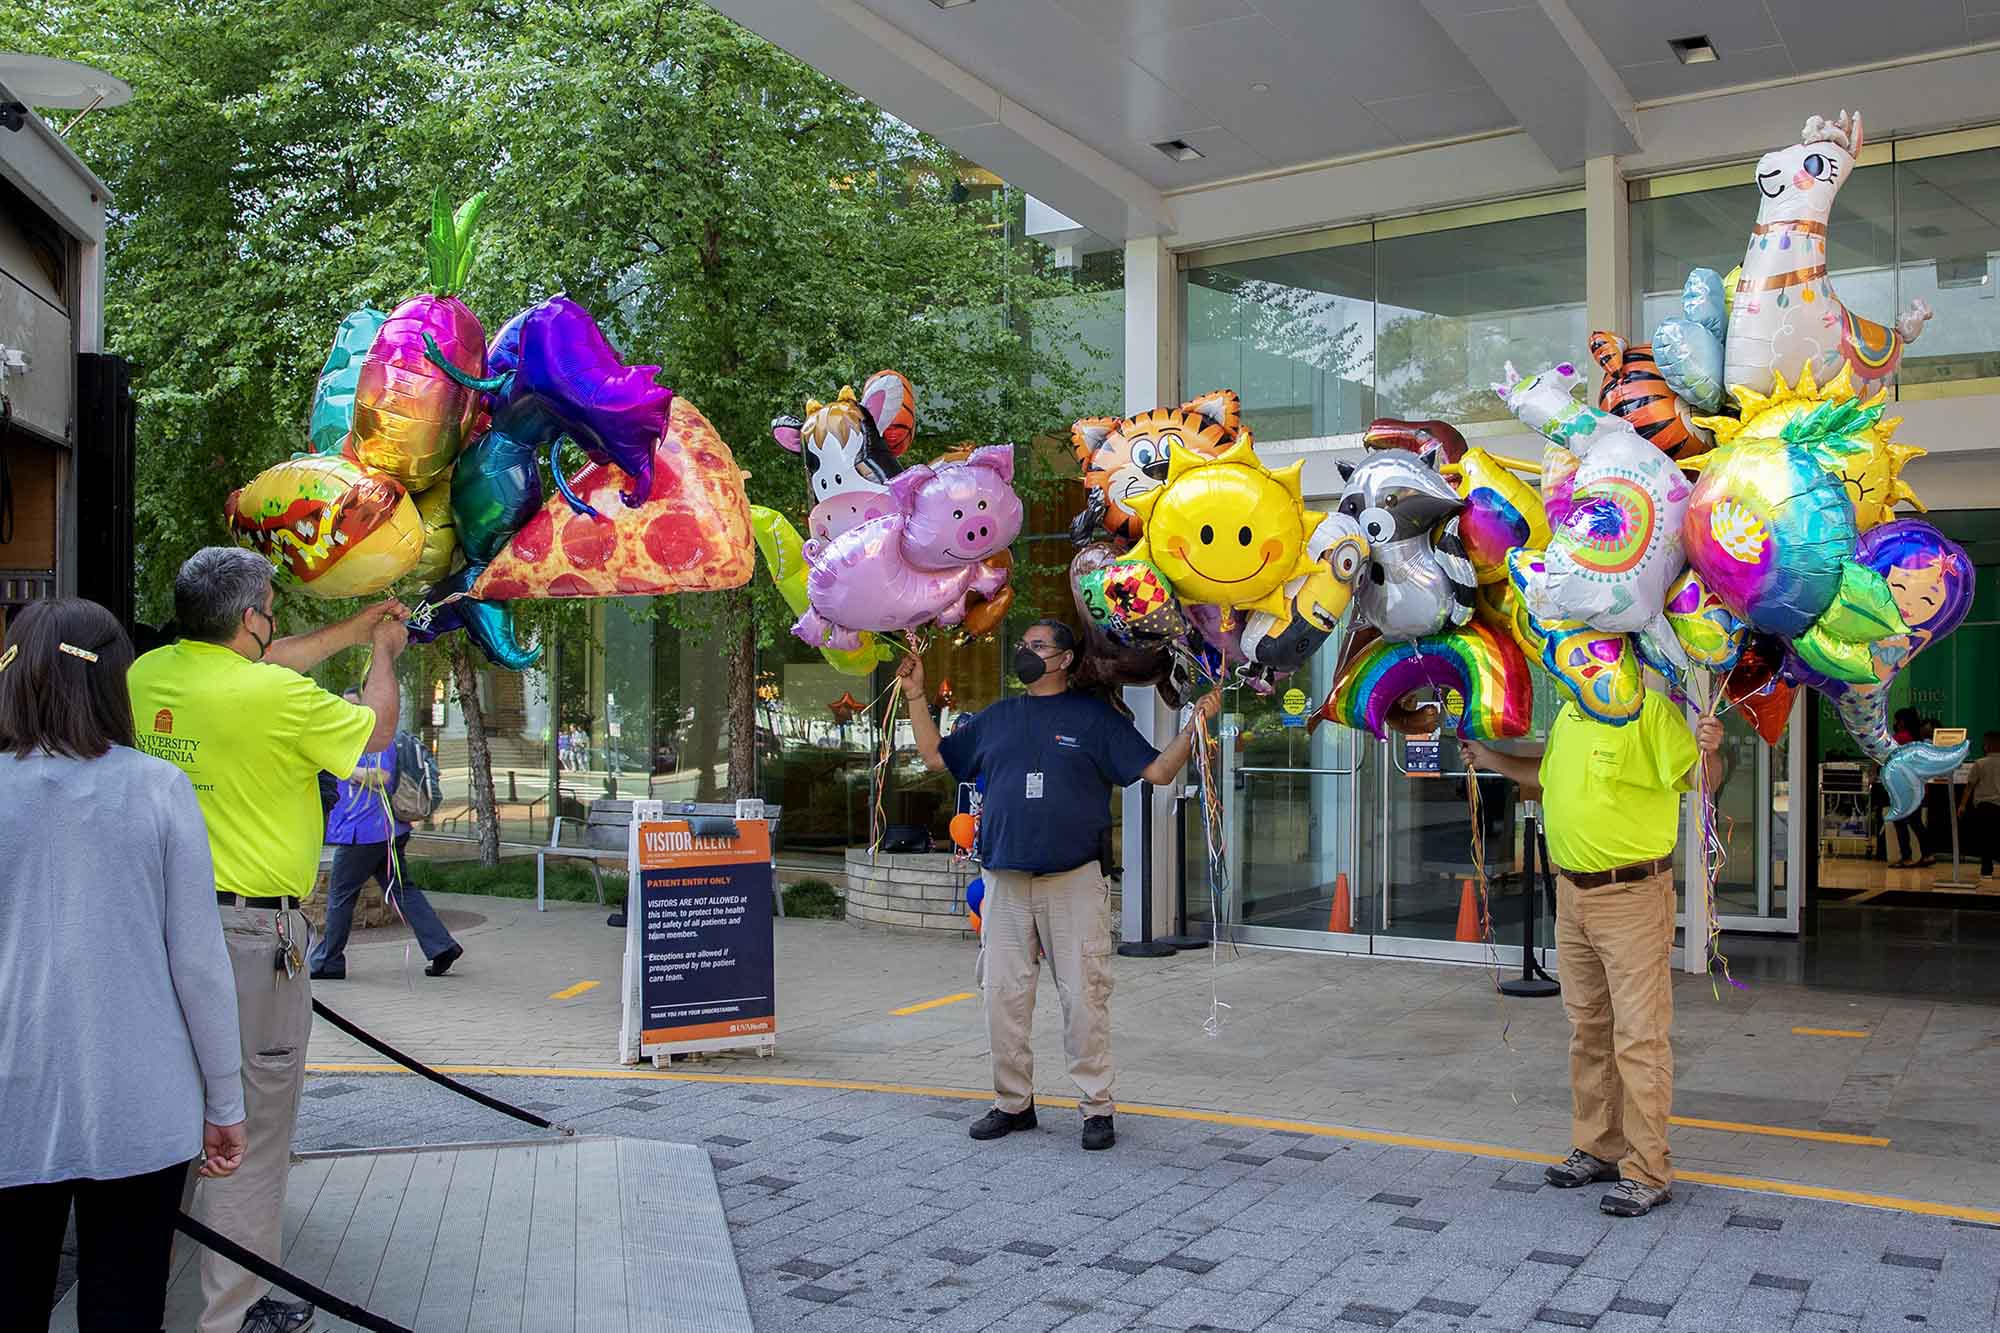 UVA staff members collecting balloons to donate to the UVA childrens hospital